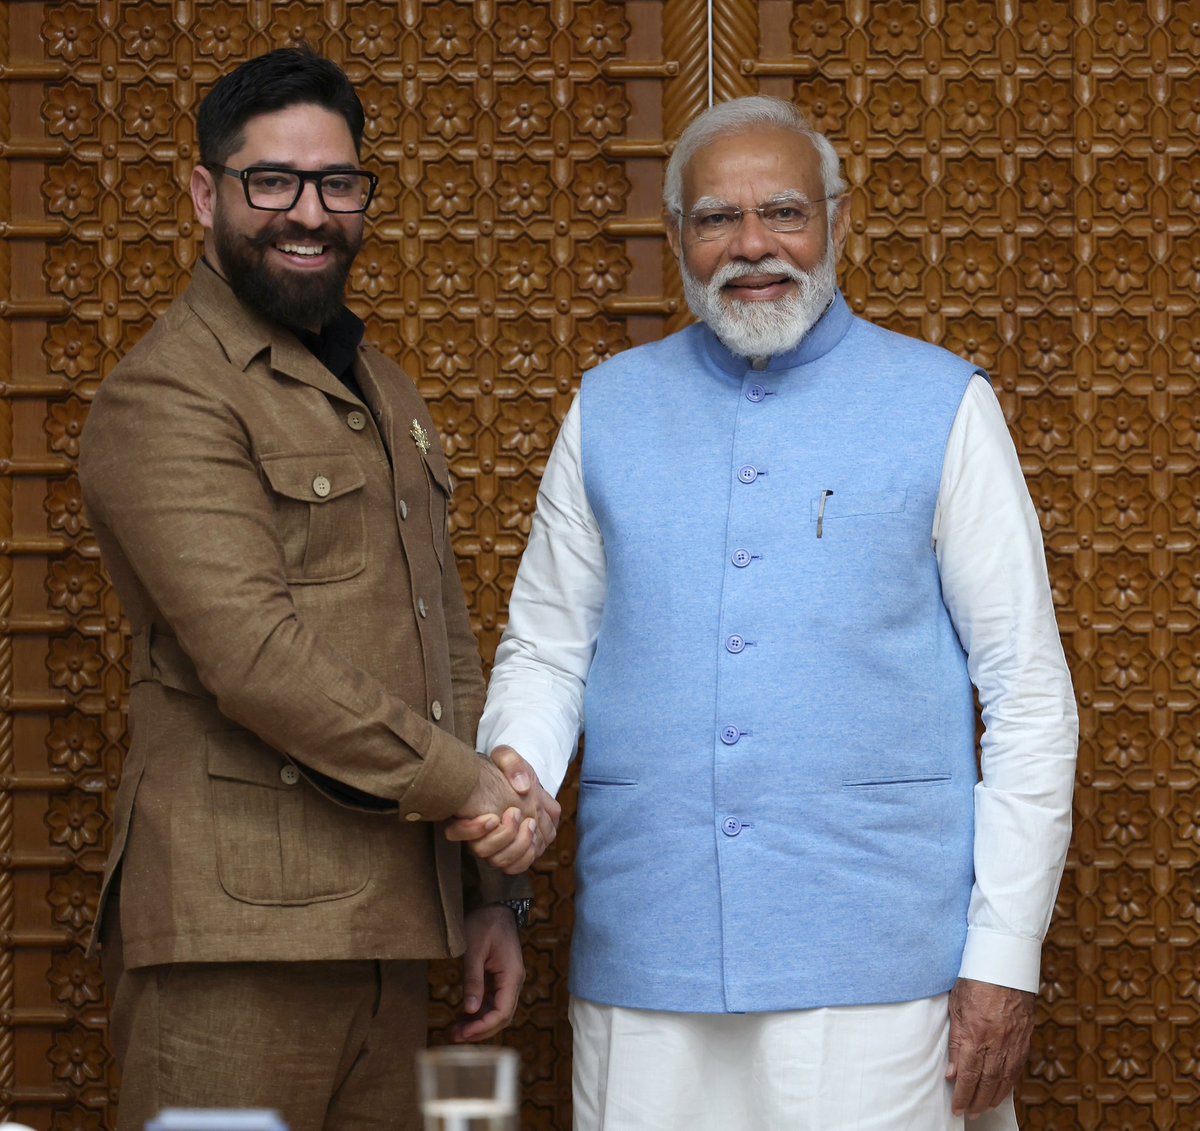 To my dear friends reveling in their trolling endeavors: Yes, I secured the interview with the Indian Prime Minister, if you try, perhaps you will too. When indulging in my work, ensure you peruse both the interview and its companion piece—they are a package deal. Before